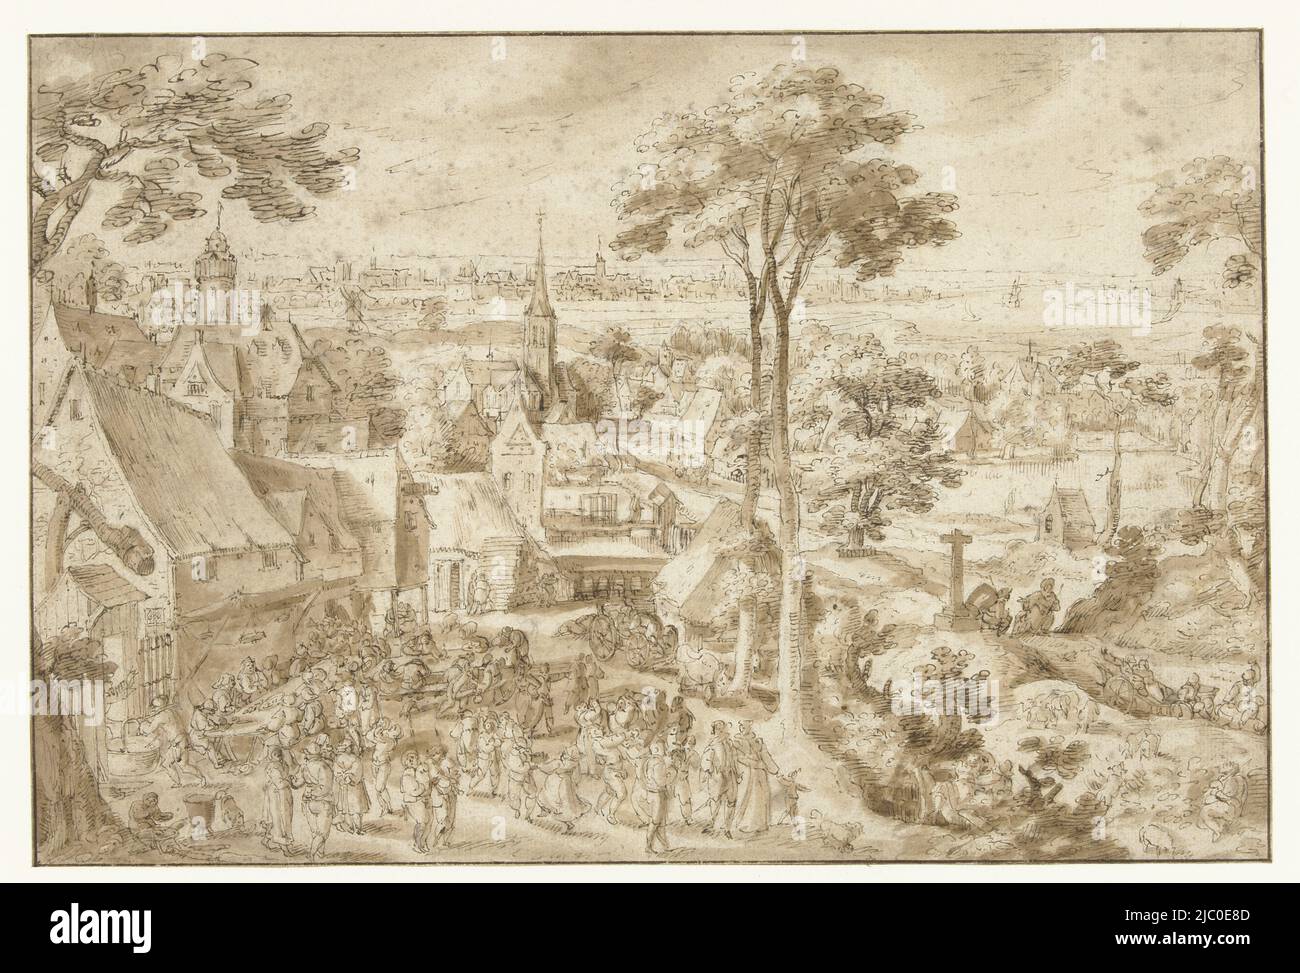 Wedding party on a village square, draughtsman: Jacob Savery (I), c. 1587 - c. 1603, paper, pen, brush, h 197 mm × w 293 mm Stock Photo